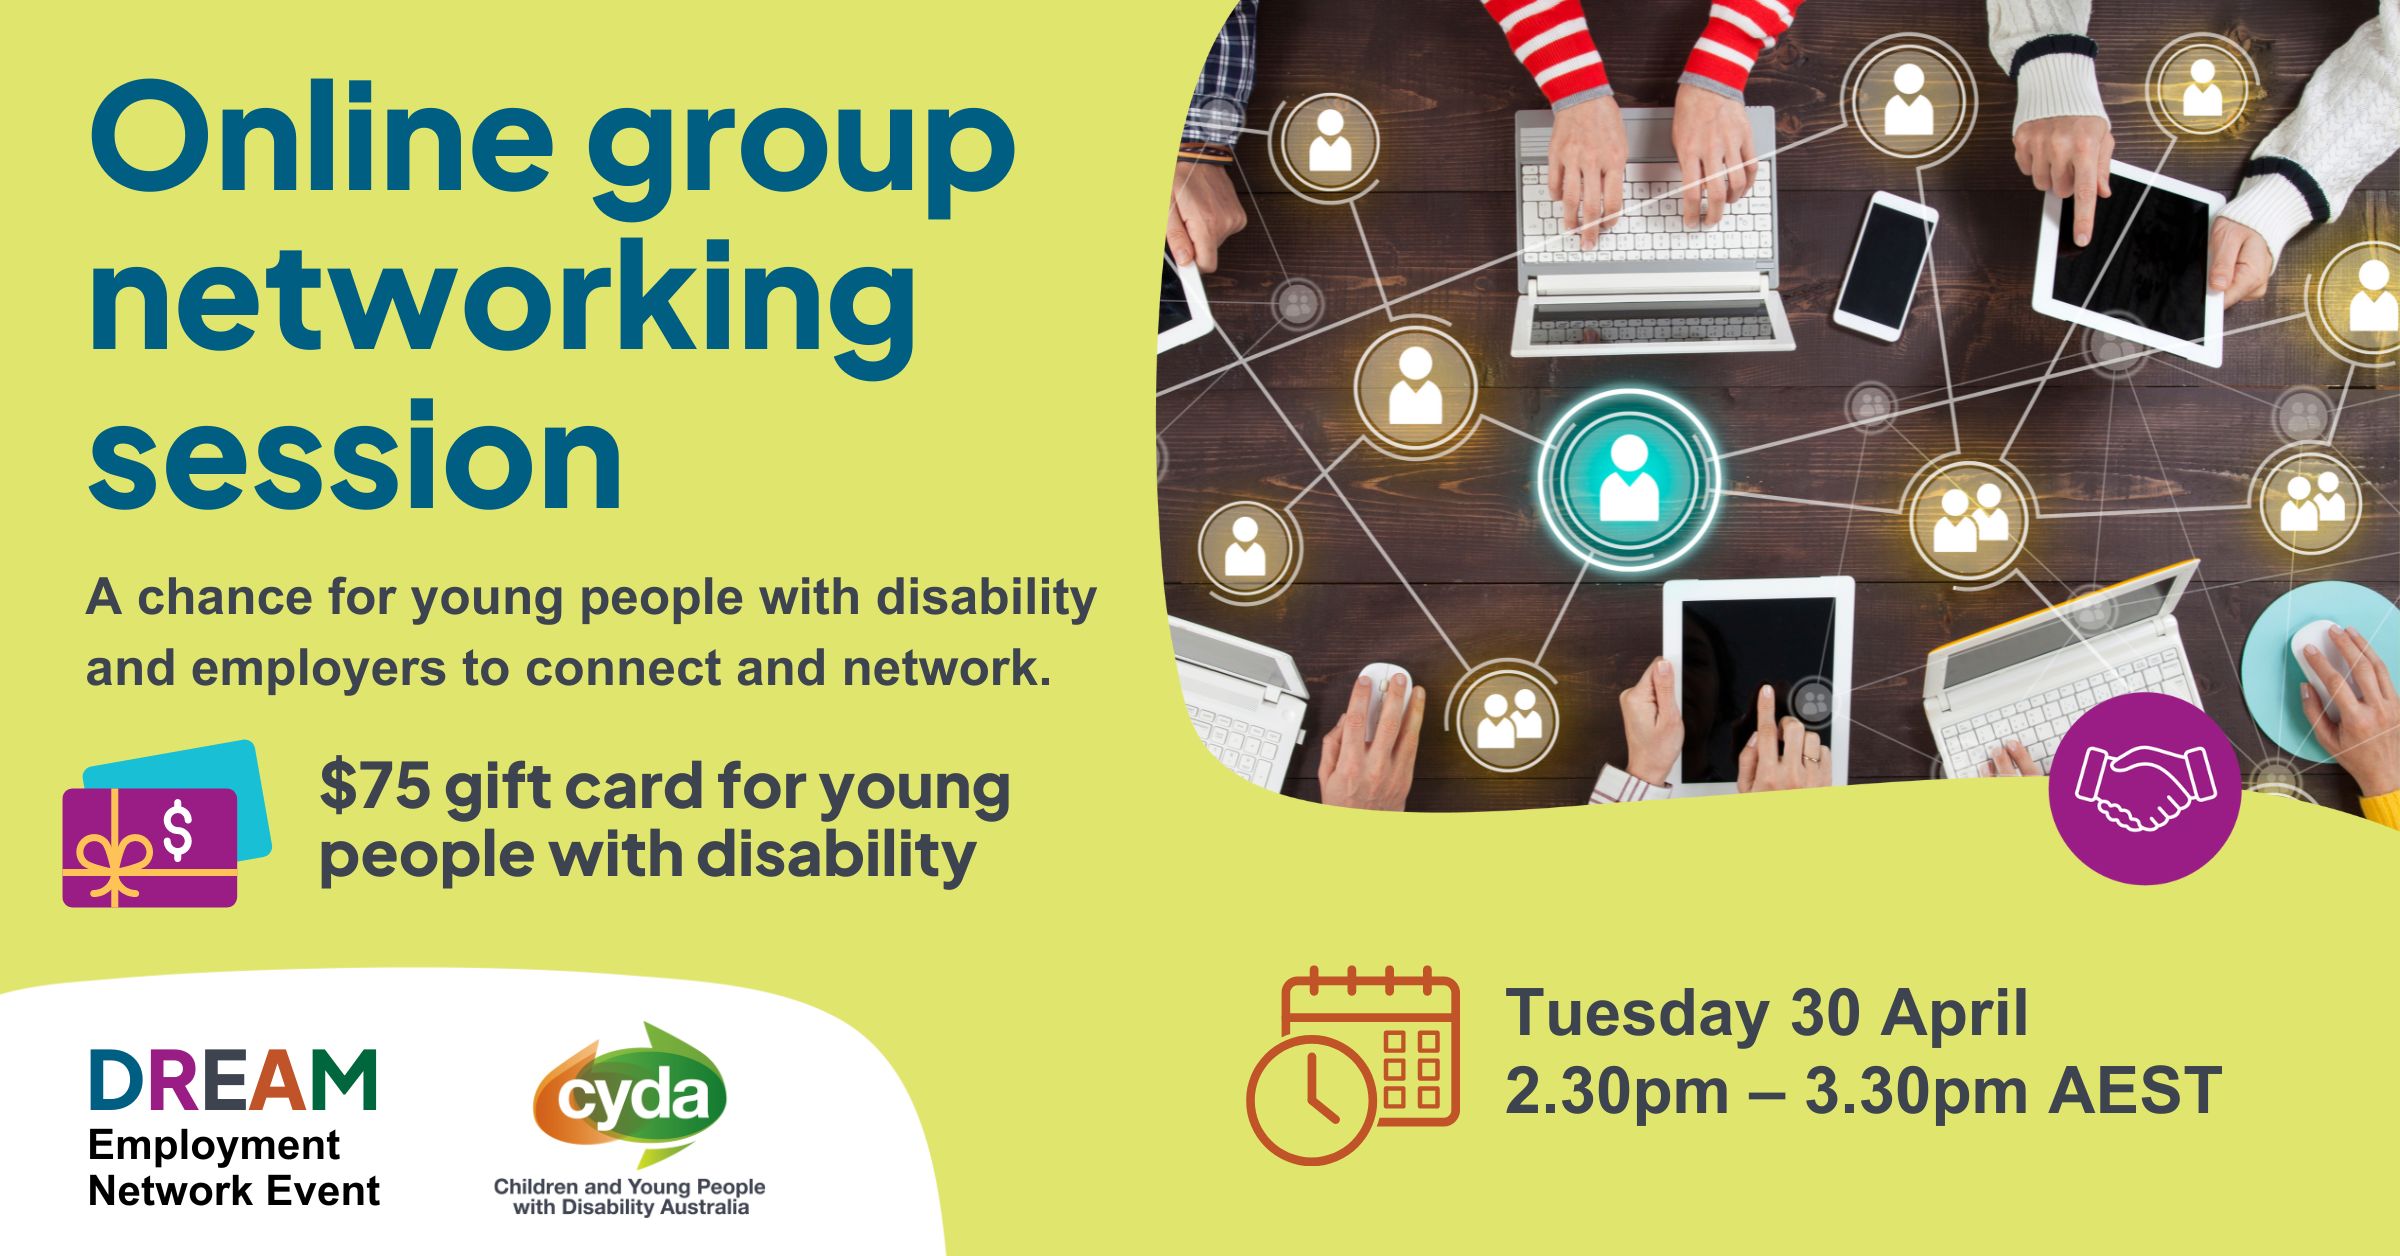 Text reads: “Online group networking session. A chance for young people with disability and employers to connect and network. $75 gift card for young people with disability. Tuesday 30 April, 2.30pm - 3.30pm AEST.” Top right is a photograph of a wood table from above, with many hands working at laptops or on devices. Overlaying this are graphics of people in circles, connected by a web of lines. Bottom left are the logos for the DREAM employment network and CYDA.